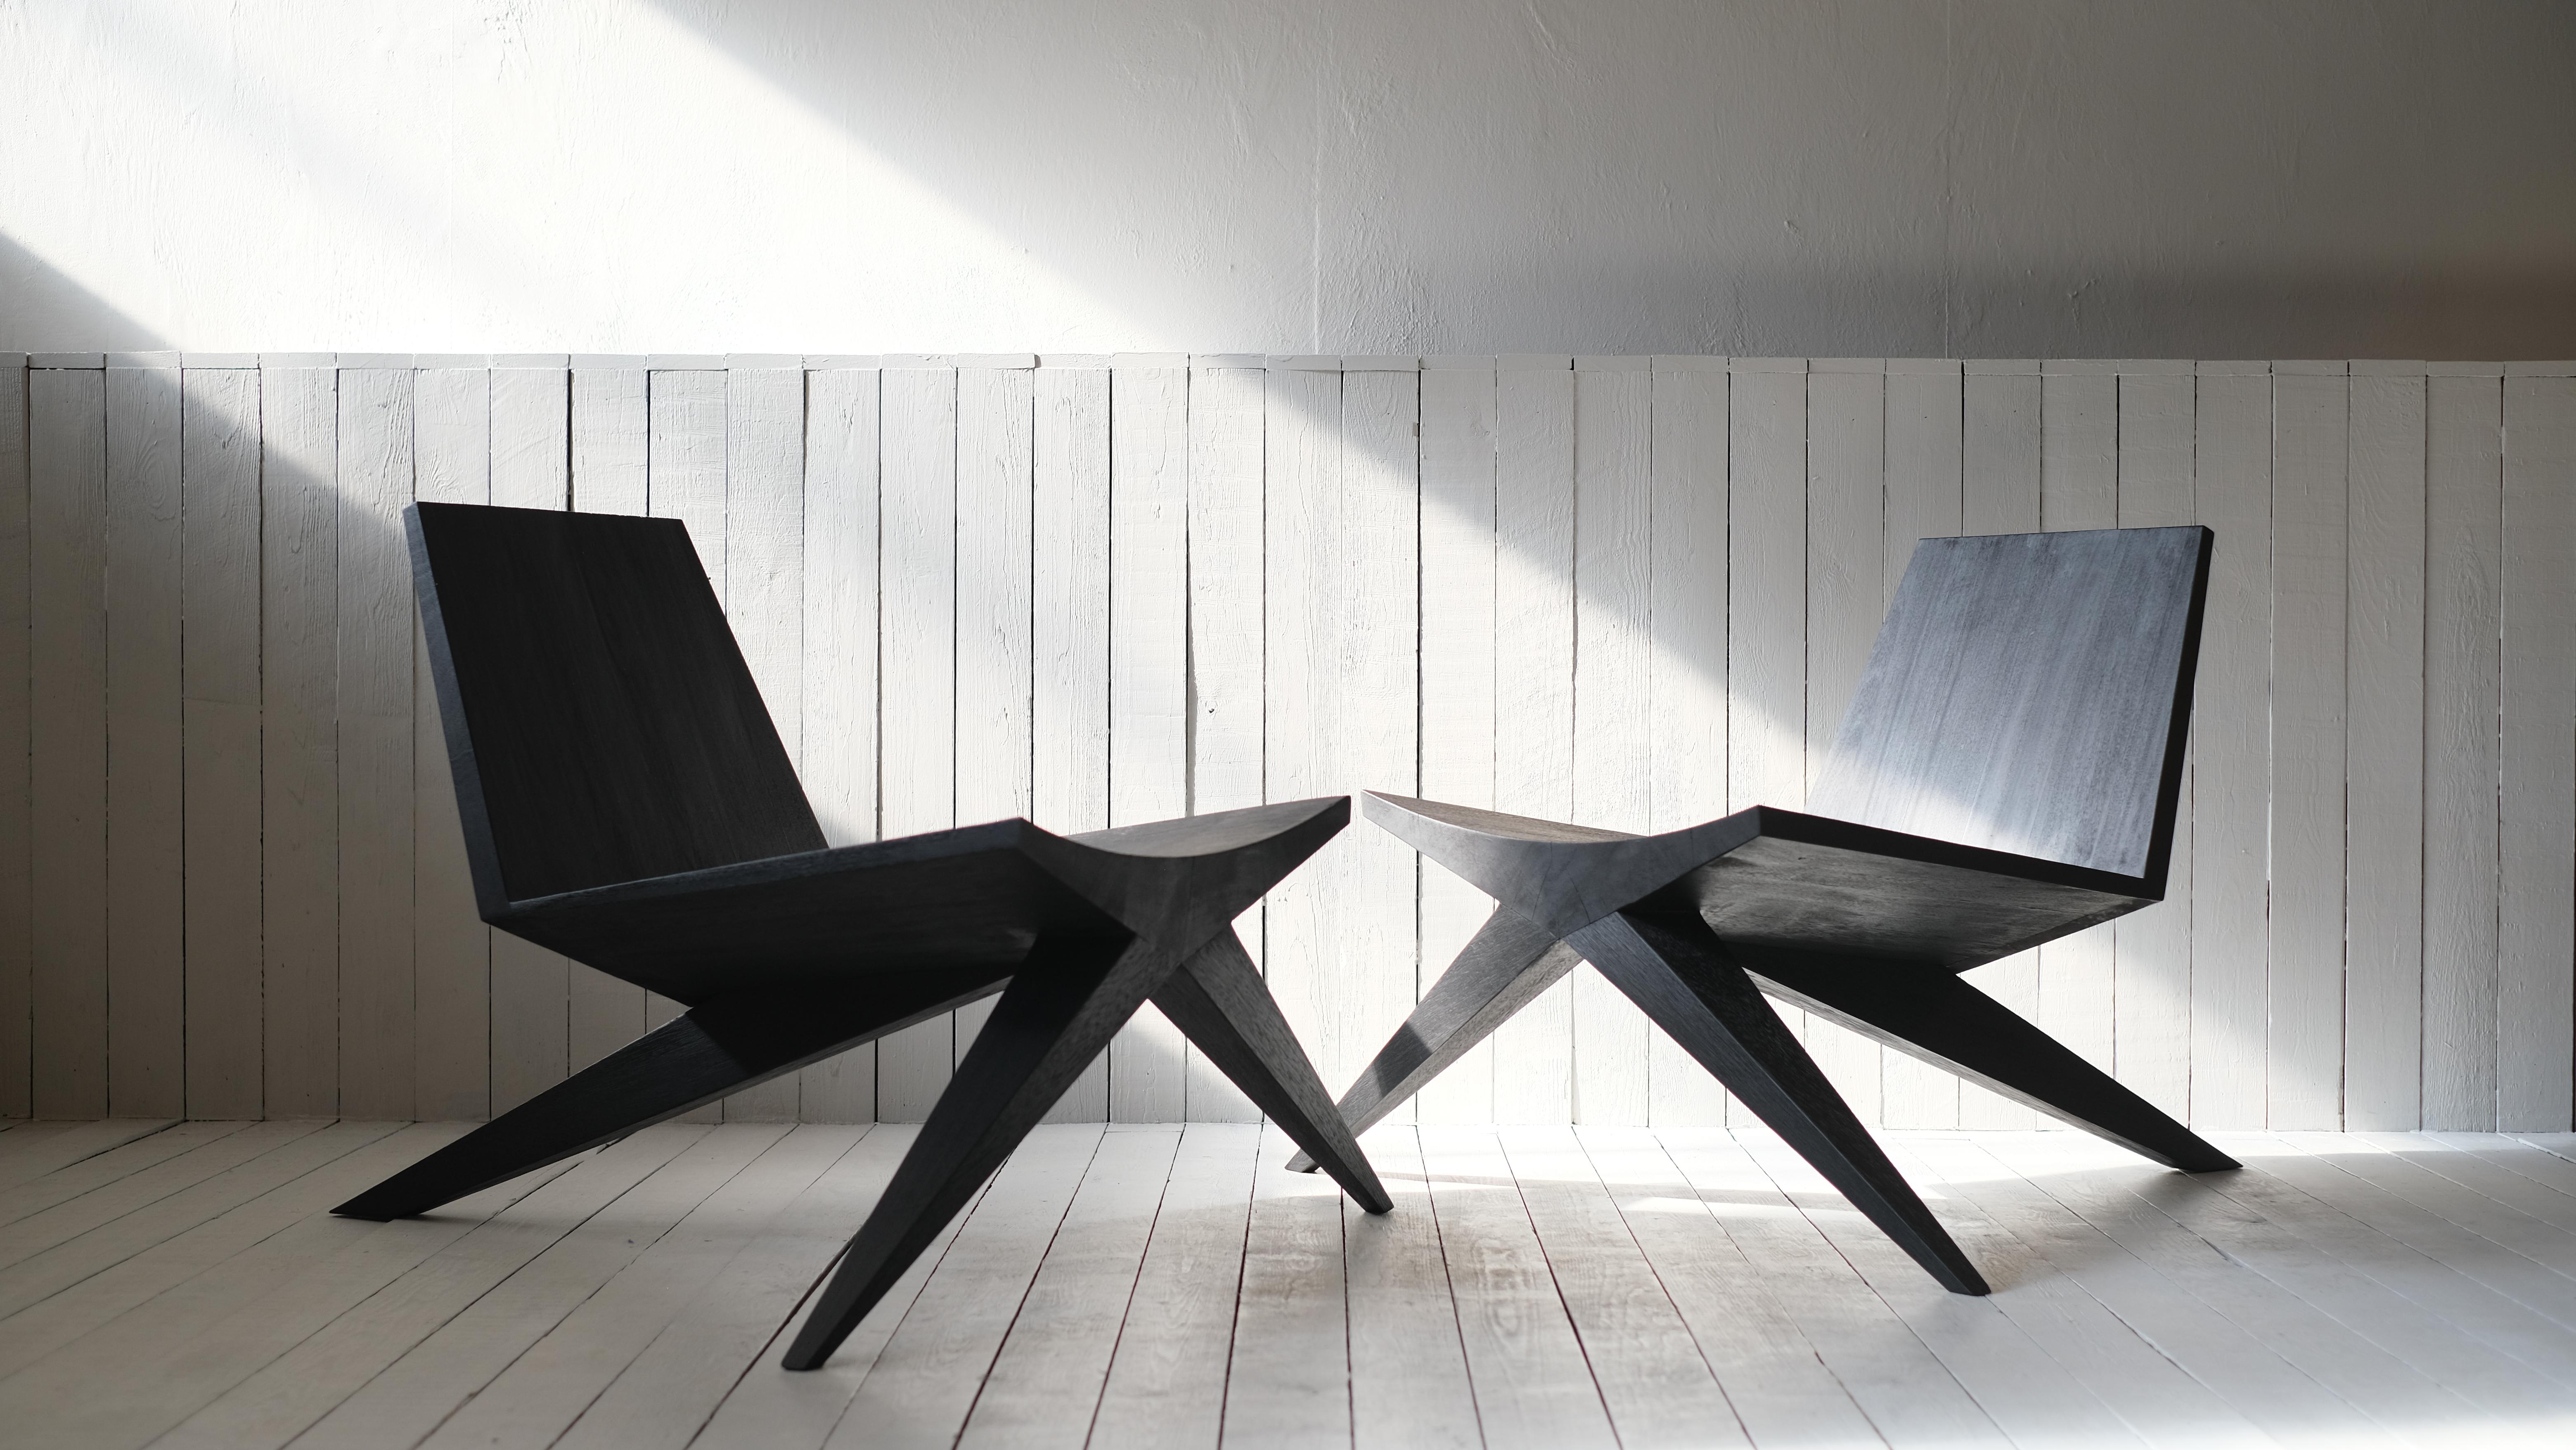 V-easy chair men by Arno Declercq
Dimensions: D100 x W90 x H70 cm
Materials: burned and waxed Iroko wood
Signed by Arno Declercq

Arno Declercq
Belgian designer and art dealer who makes bespoke objects with passion for design, atmosphere,